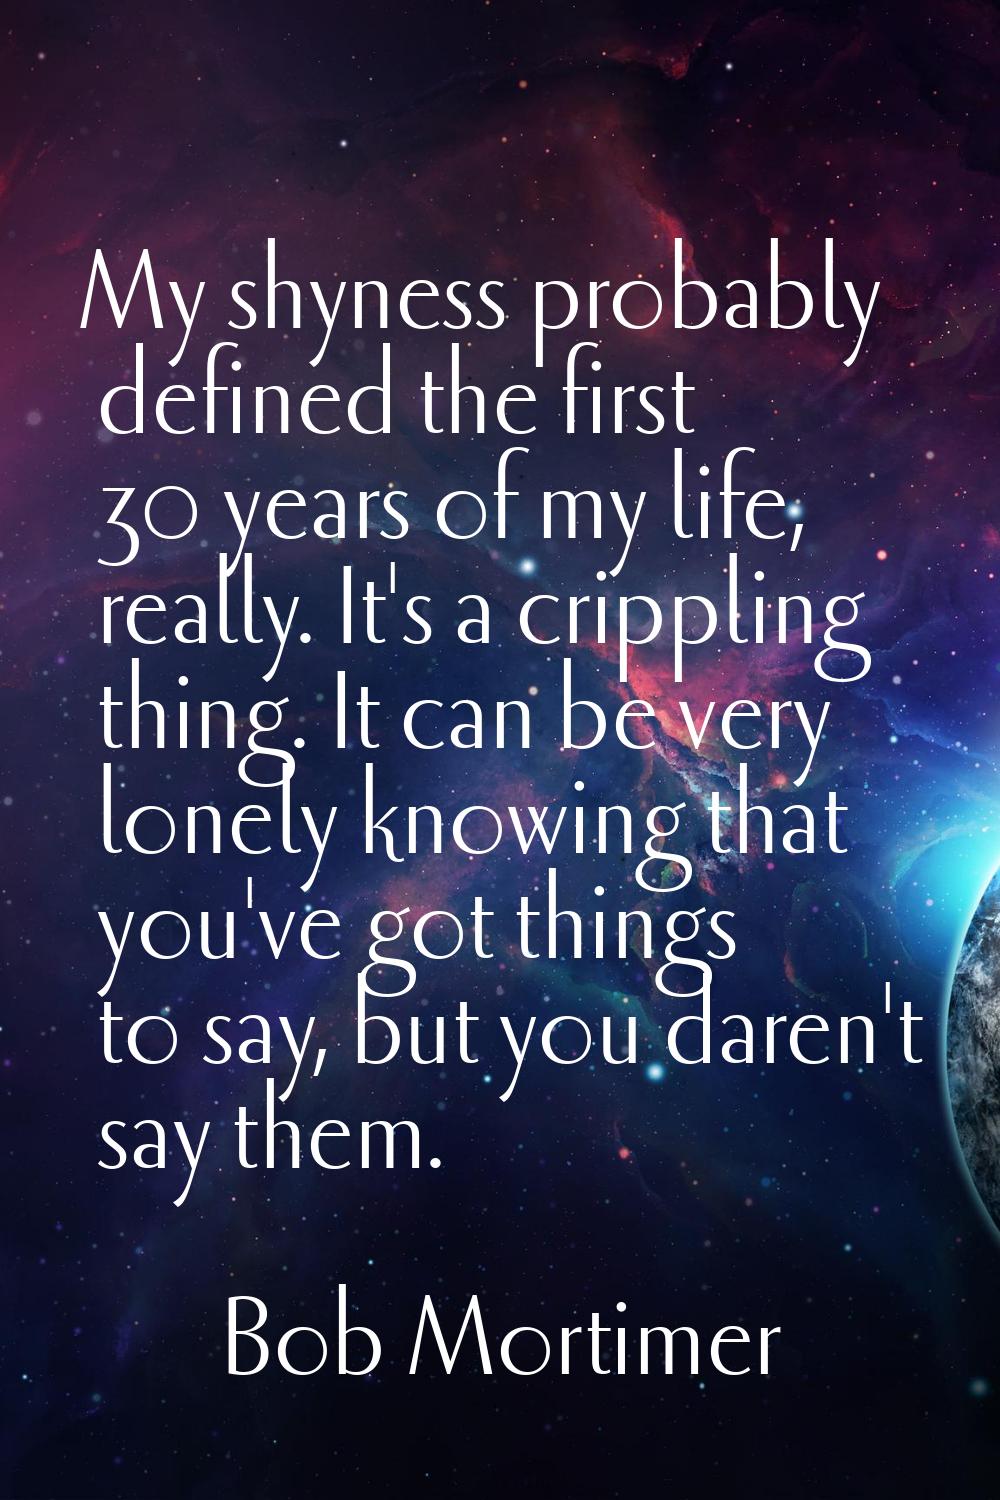 My shyness probably defined the first 30 years of my life, really. It's a crippling thing. It can b